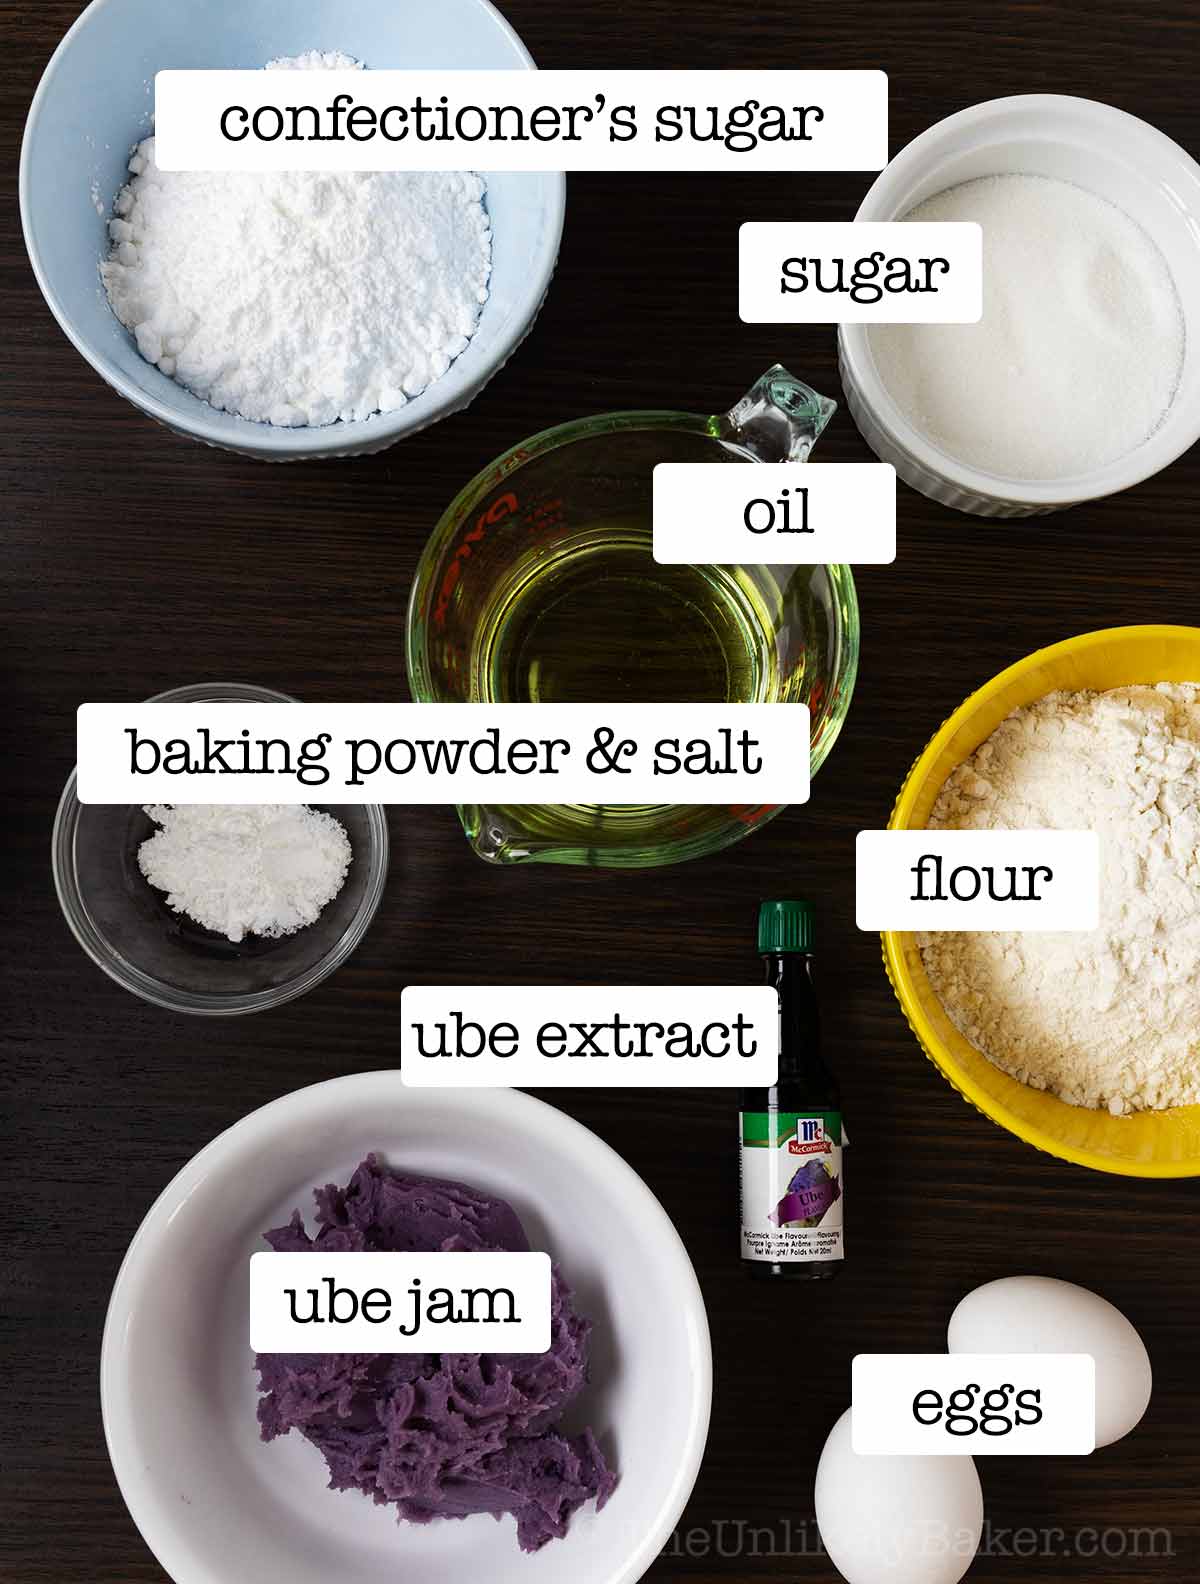 Ube crinkle ingredients with text overlay.